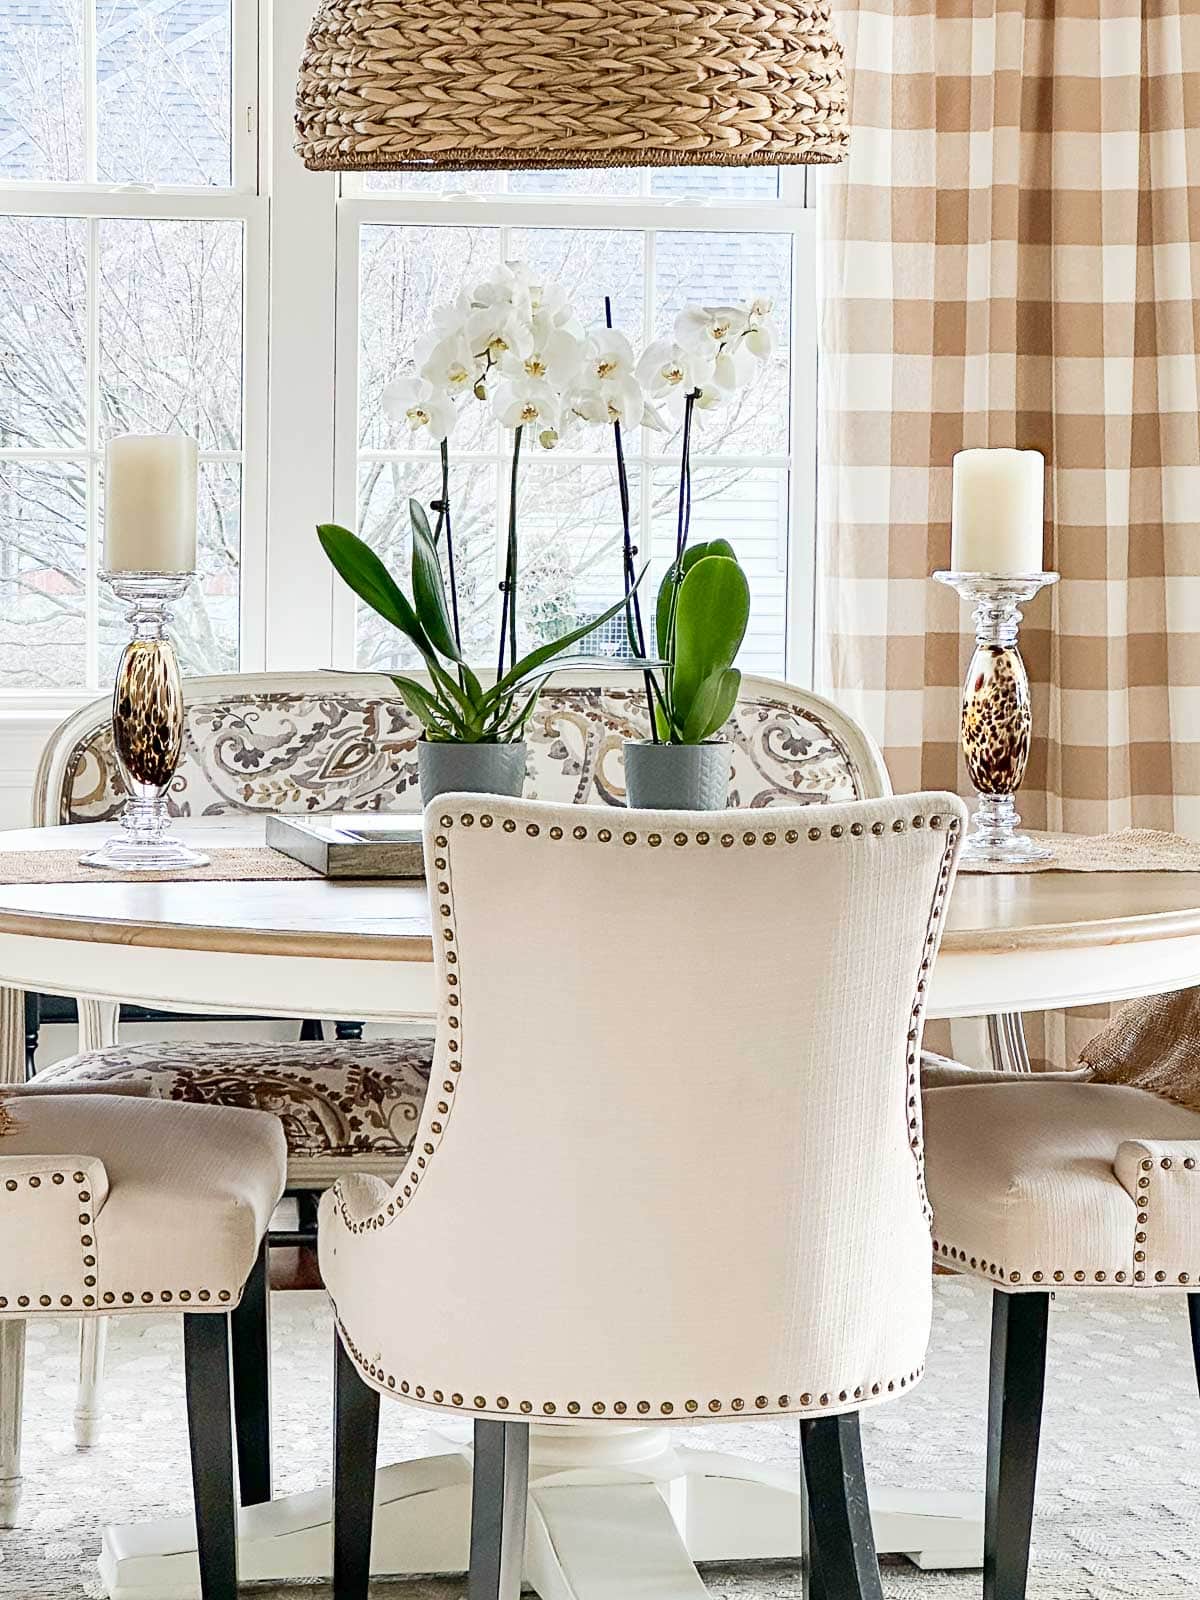 Winter Decorating Changes In The Dining Room